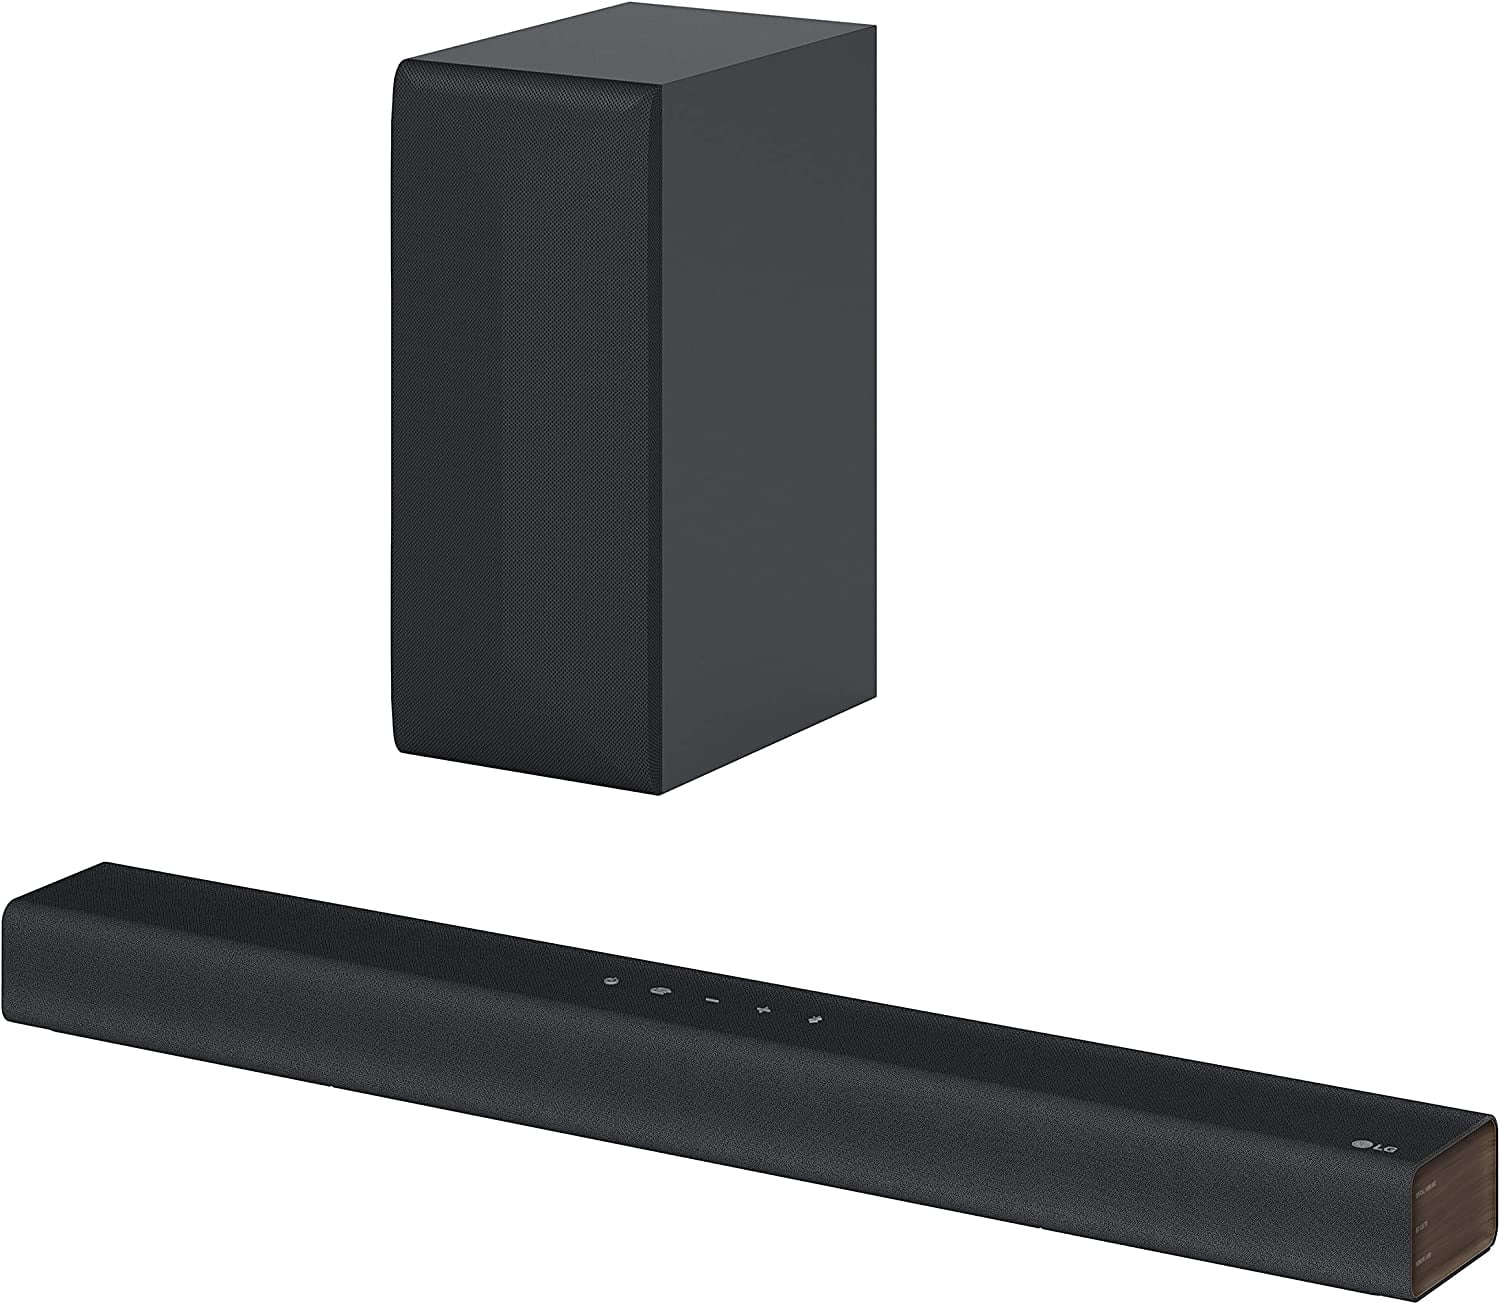 LG S40Q 2.1 Channel 300W Sound Bar and Wireless Subwoofer with Bluetooth